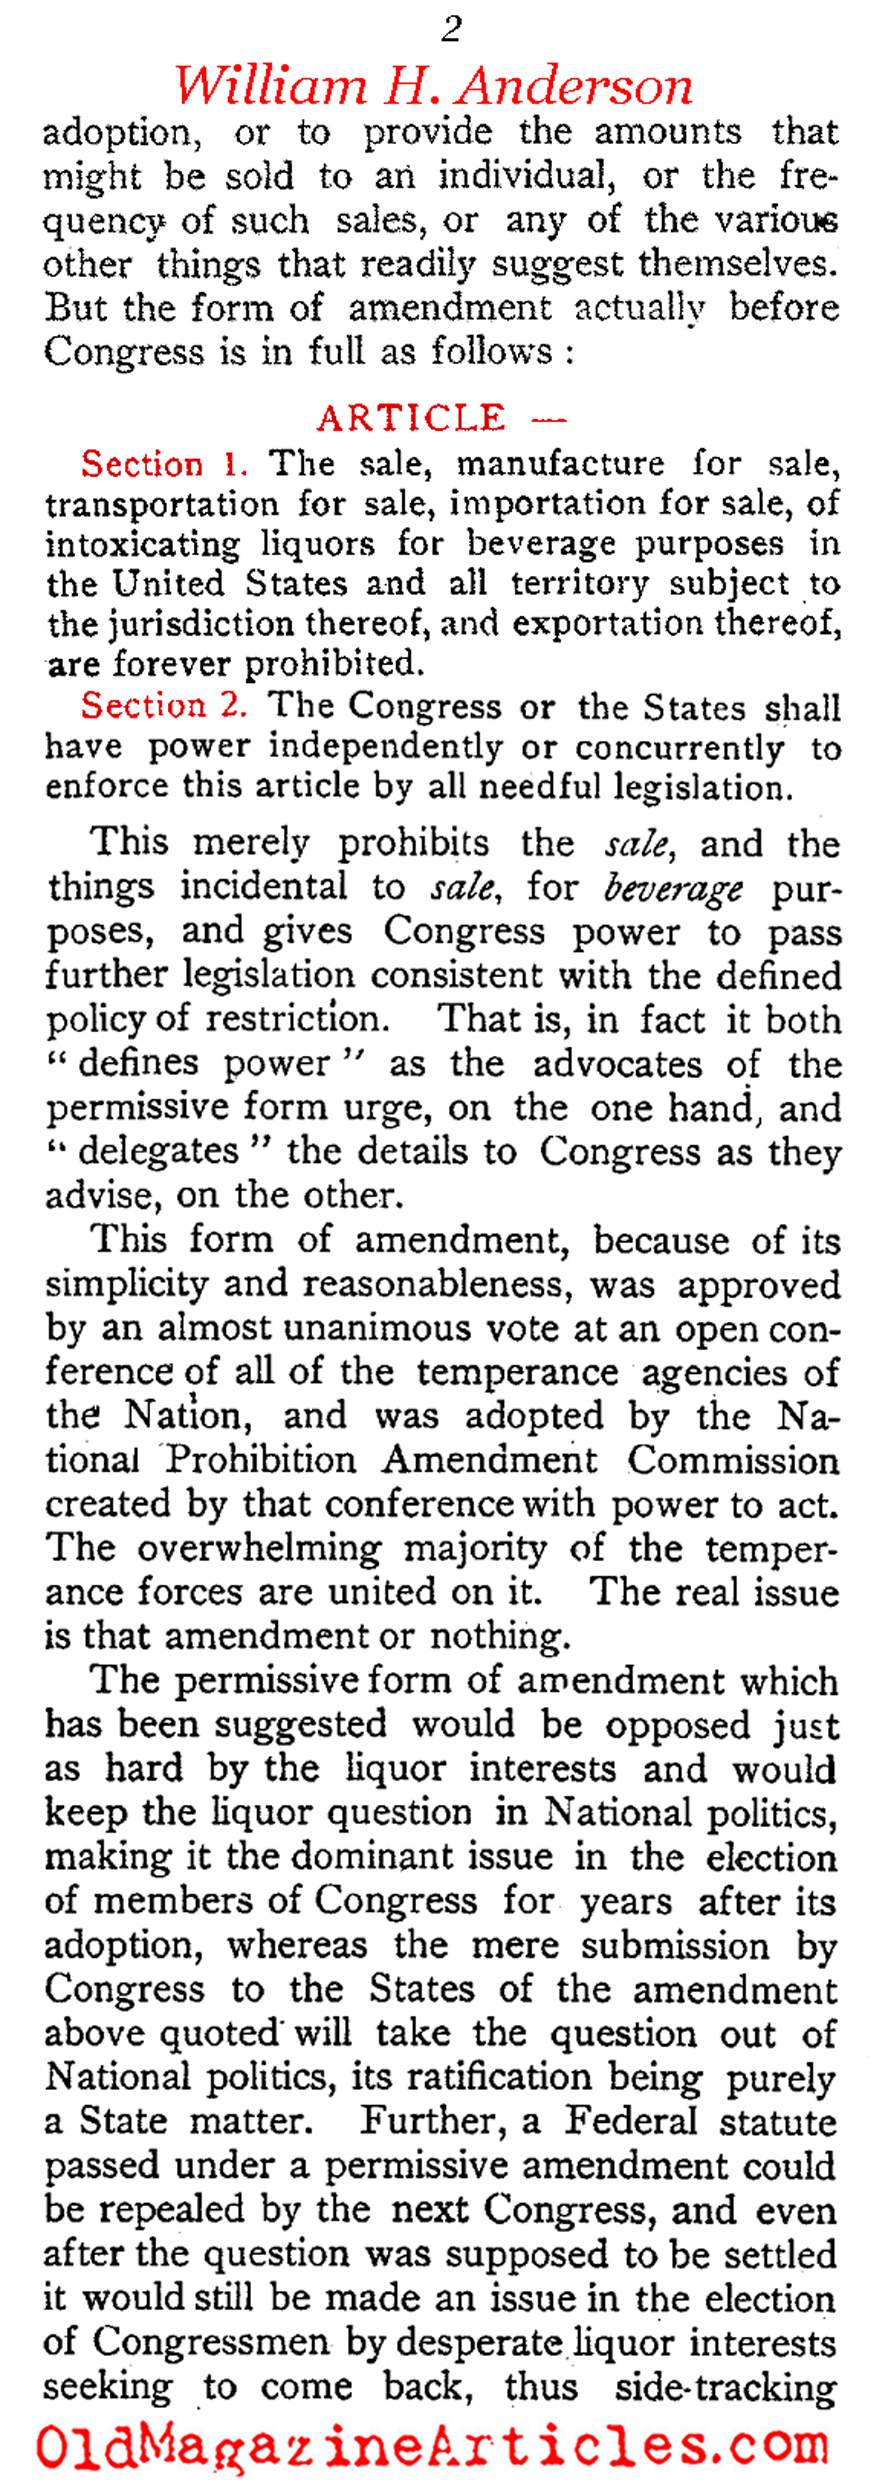 A Look at at  What  the  Prohibition  Amendment  Might Look Like  (The Outlook, 1916)